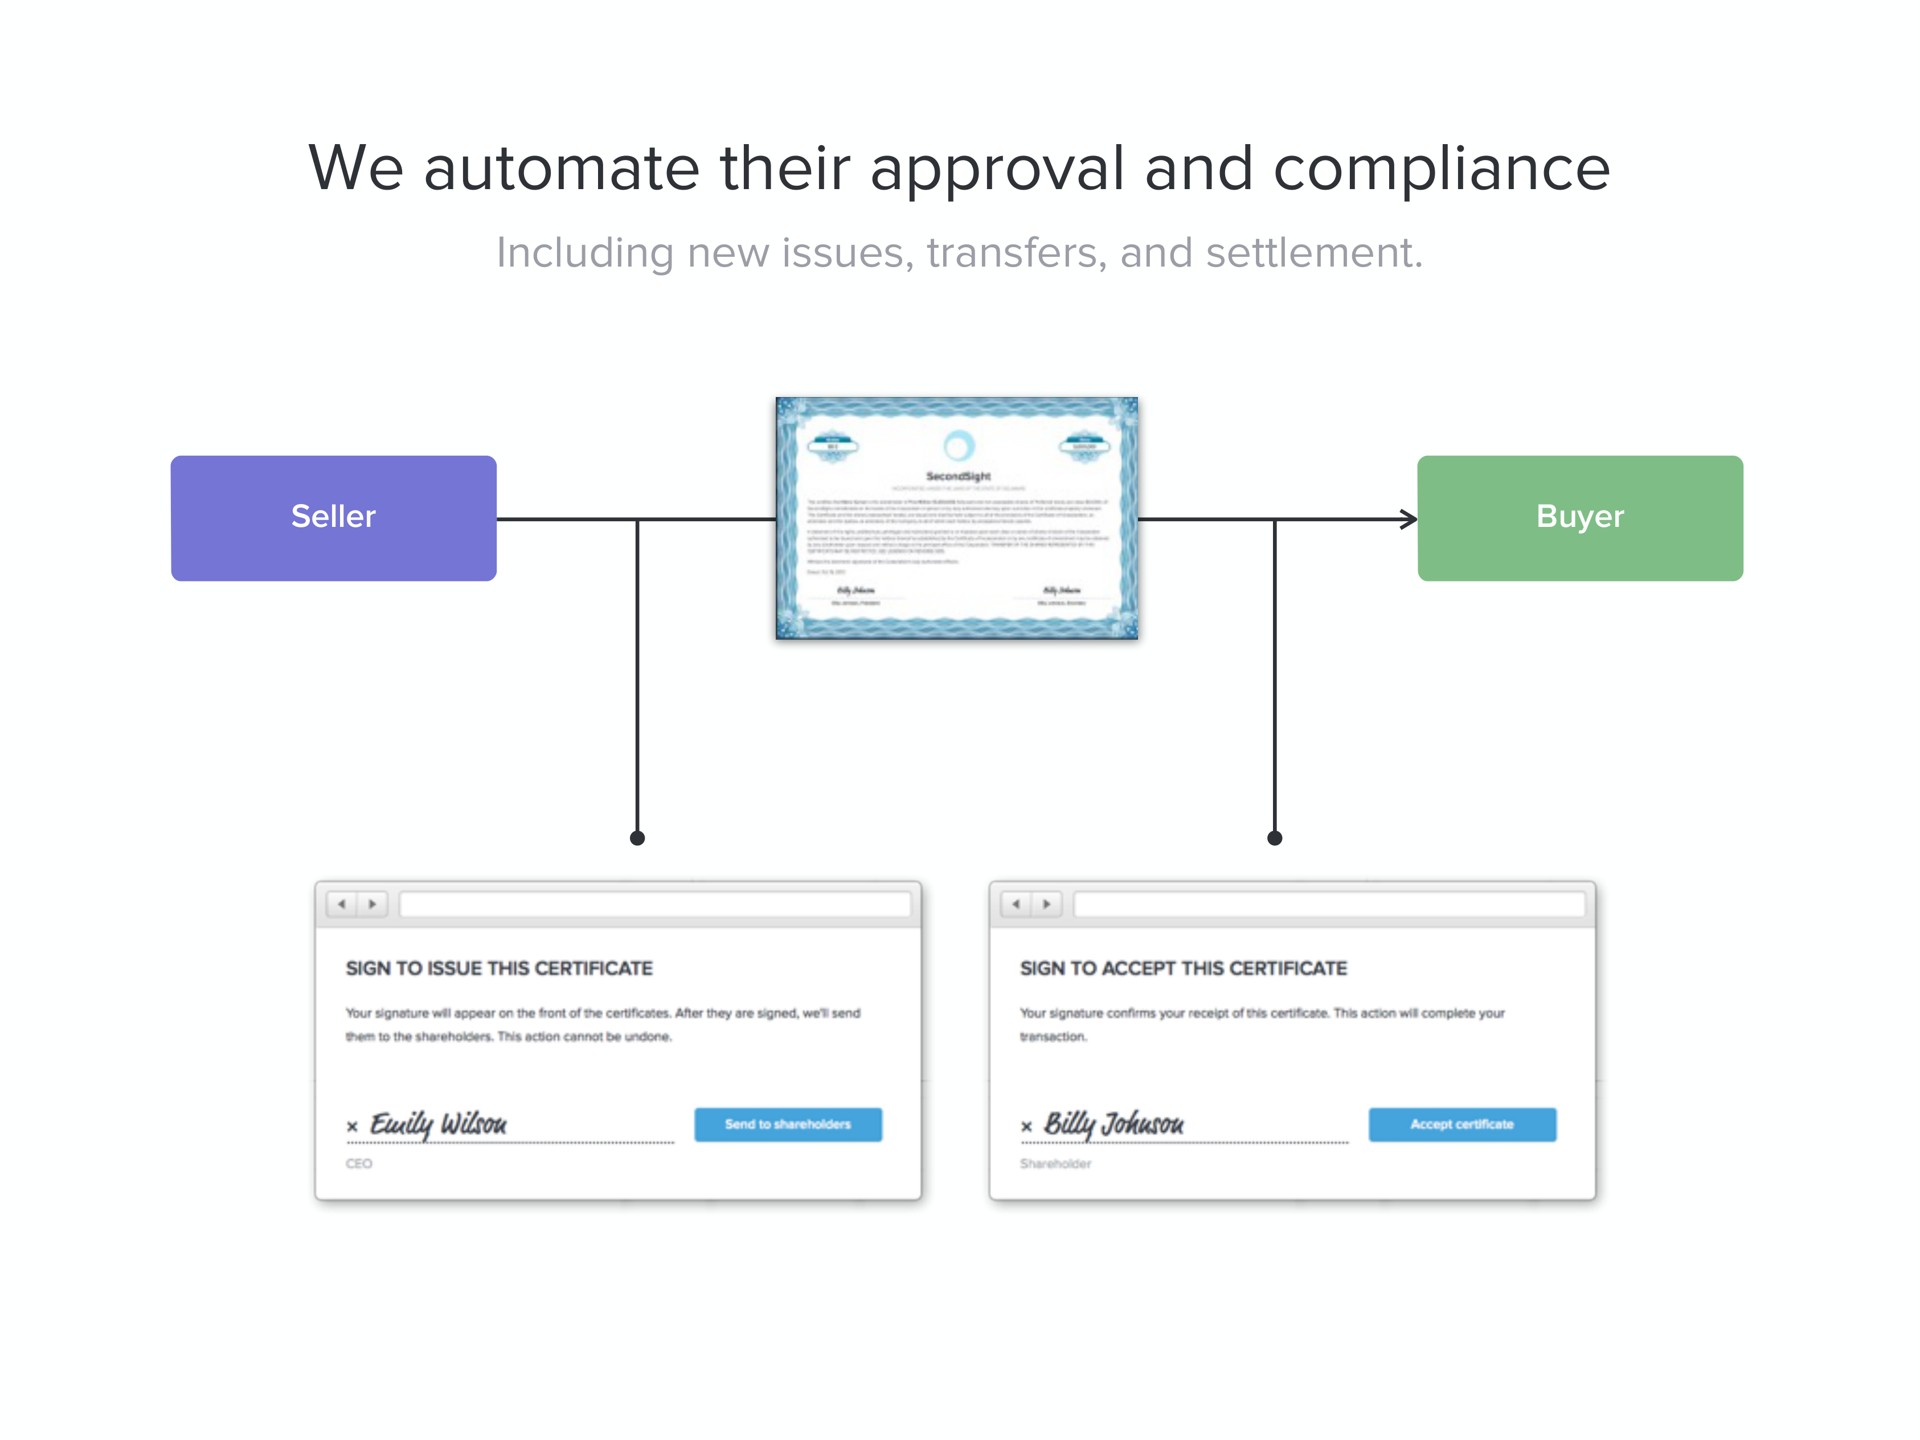 we their approval and compliance | Carta